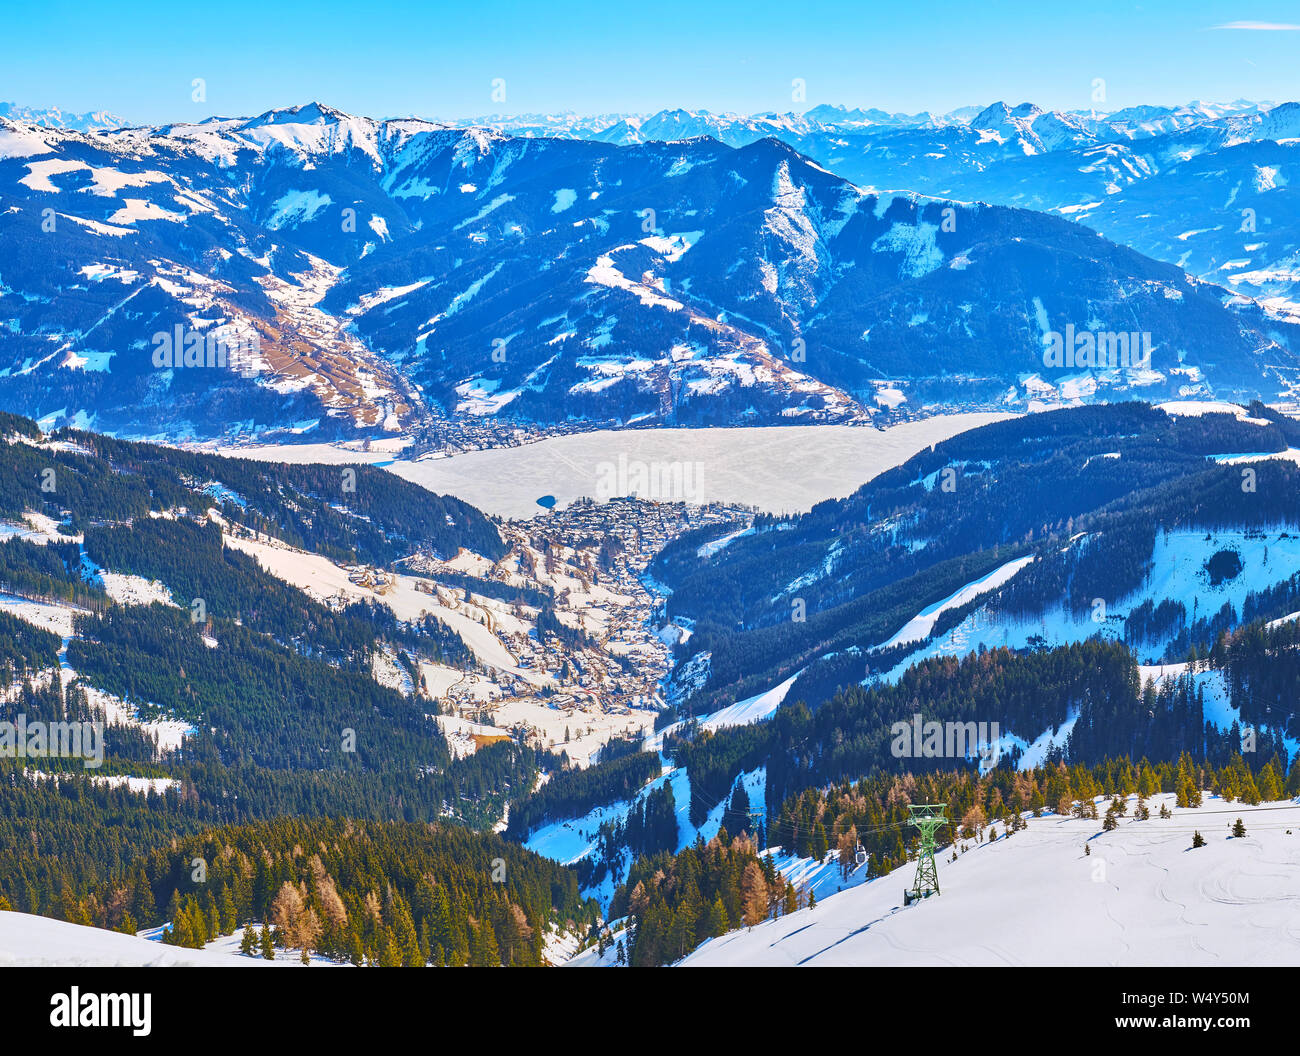 Spectacular view from the peak of Schmitten mount on the snowy Alps of Kaprun and Zell am Zee resorts and the frozen Zeller see (lake), located in hig Stock Photo